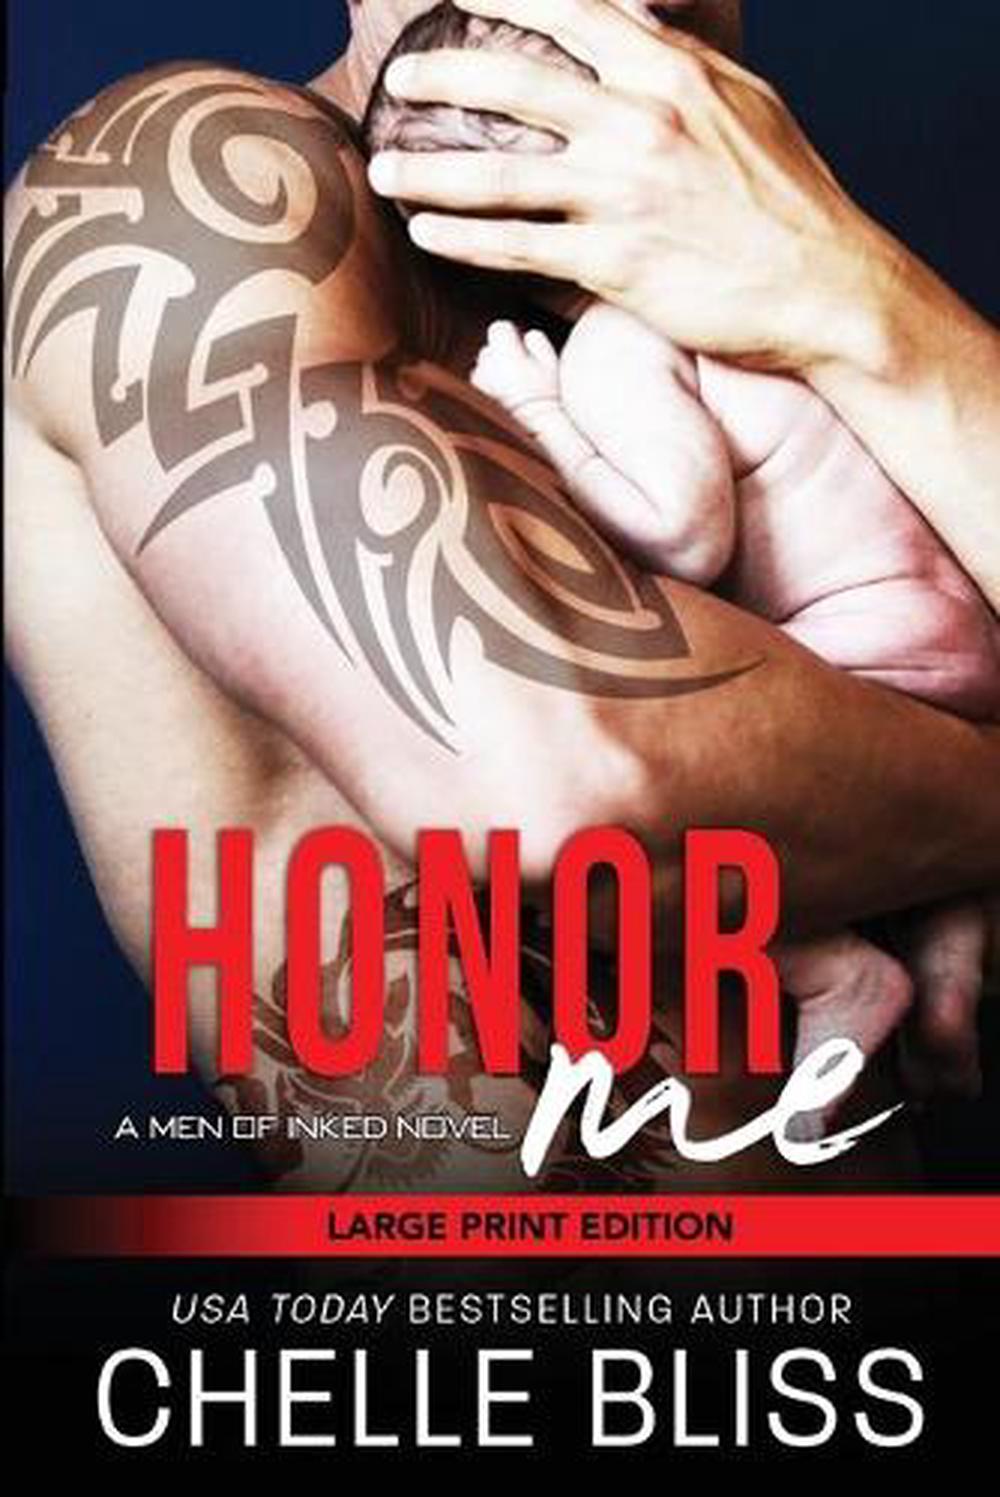 Blood and Honor by Chelle Ang